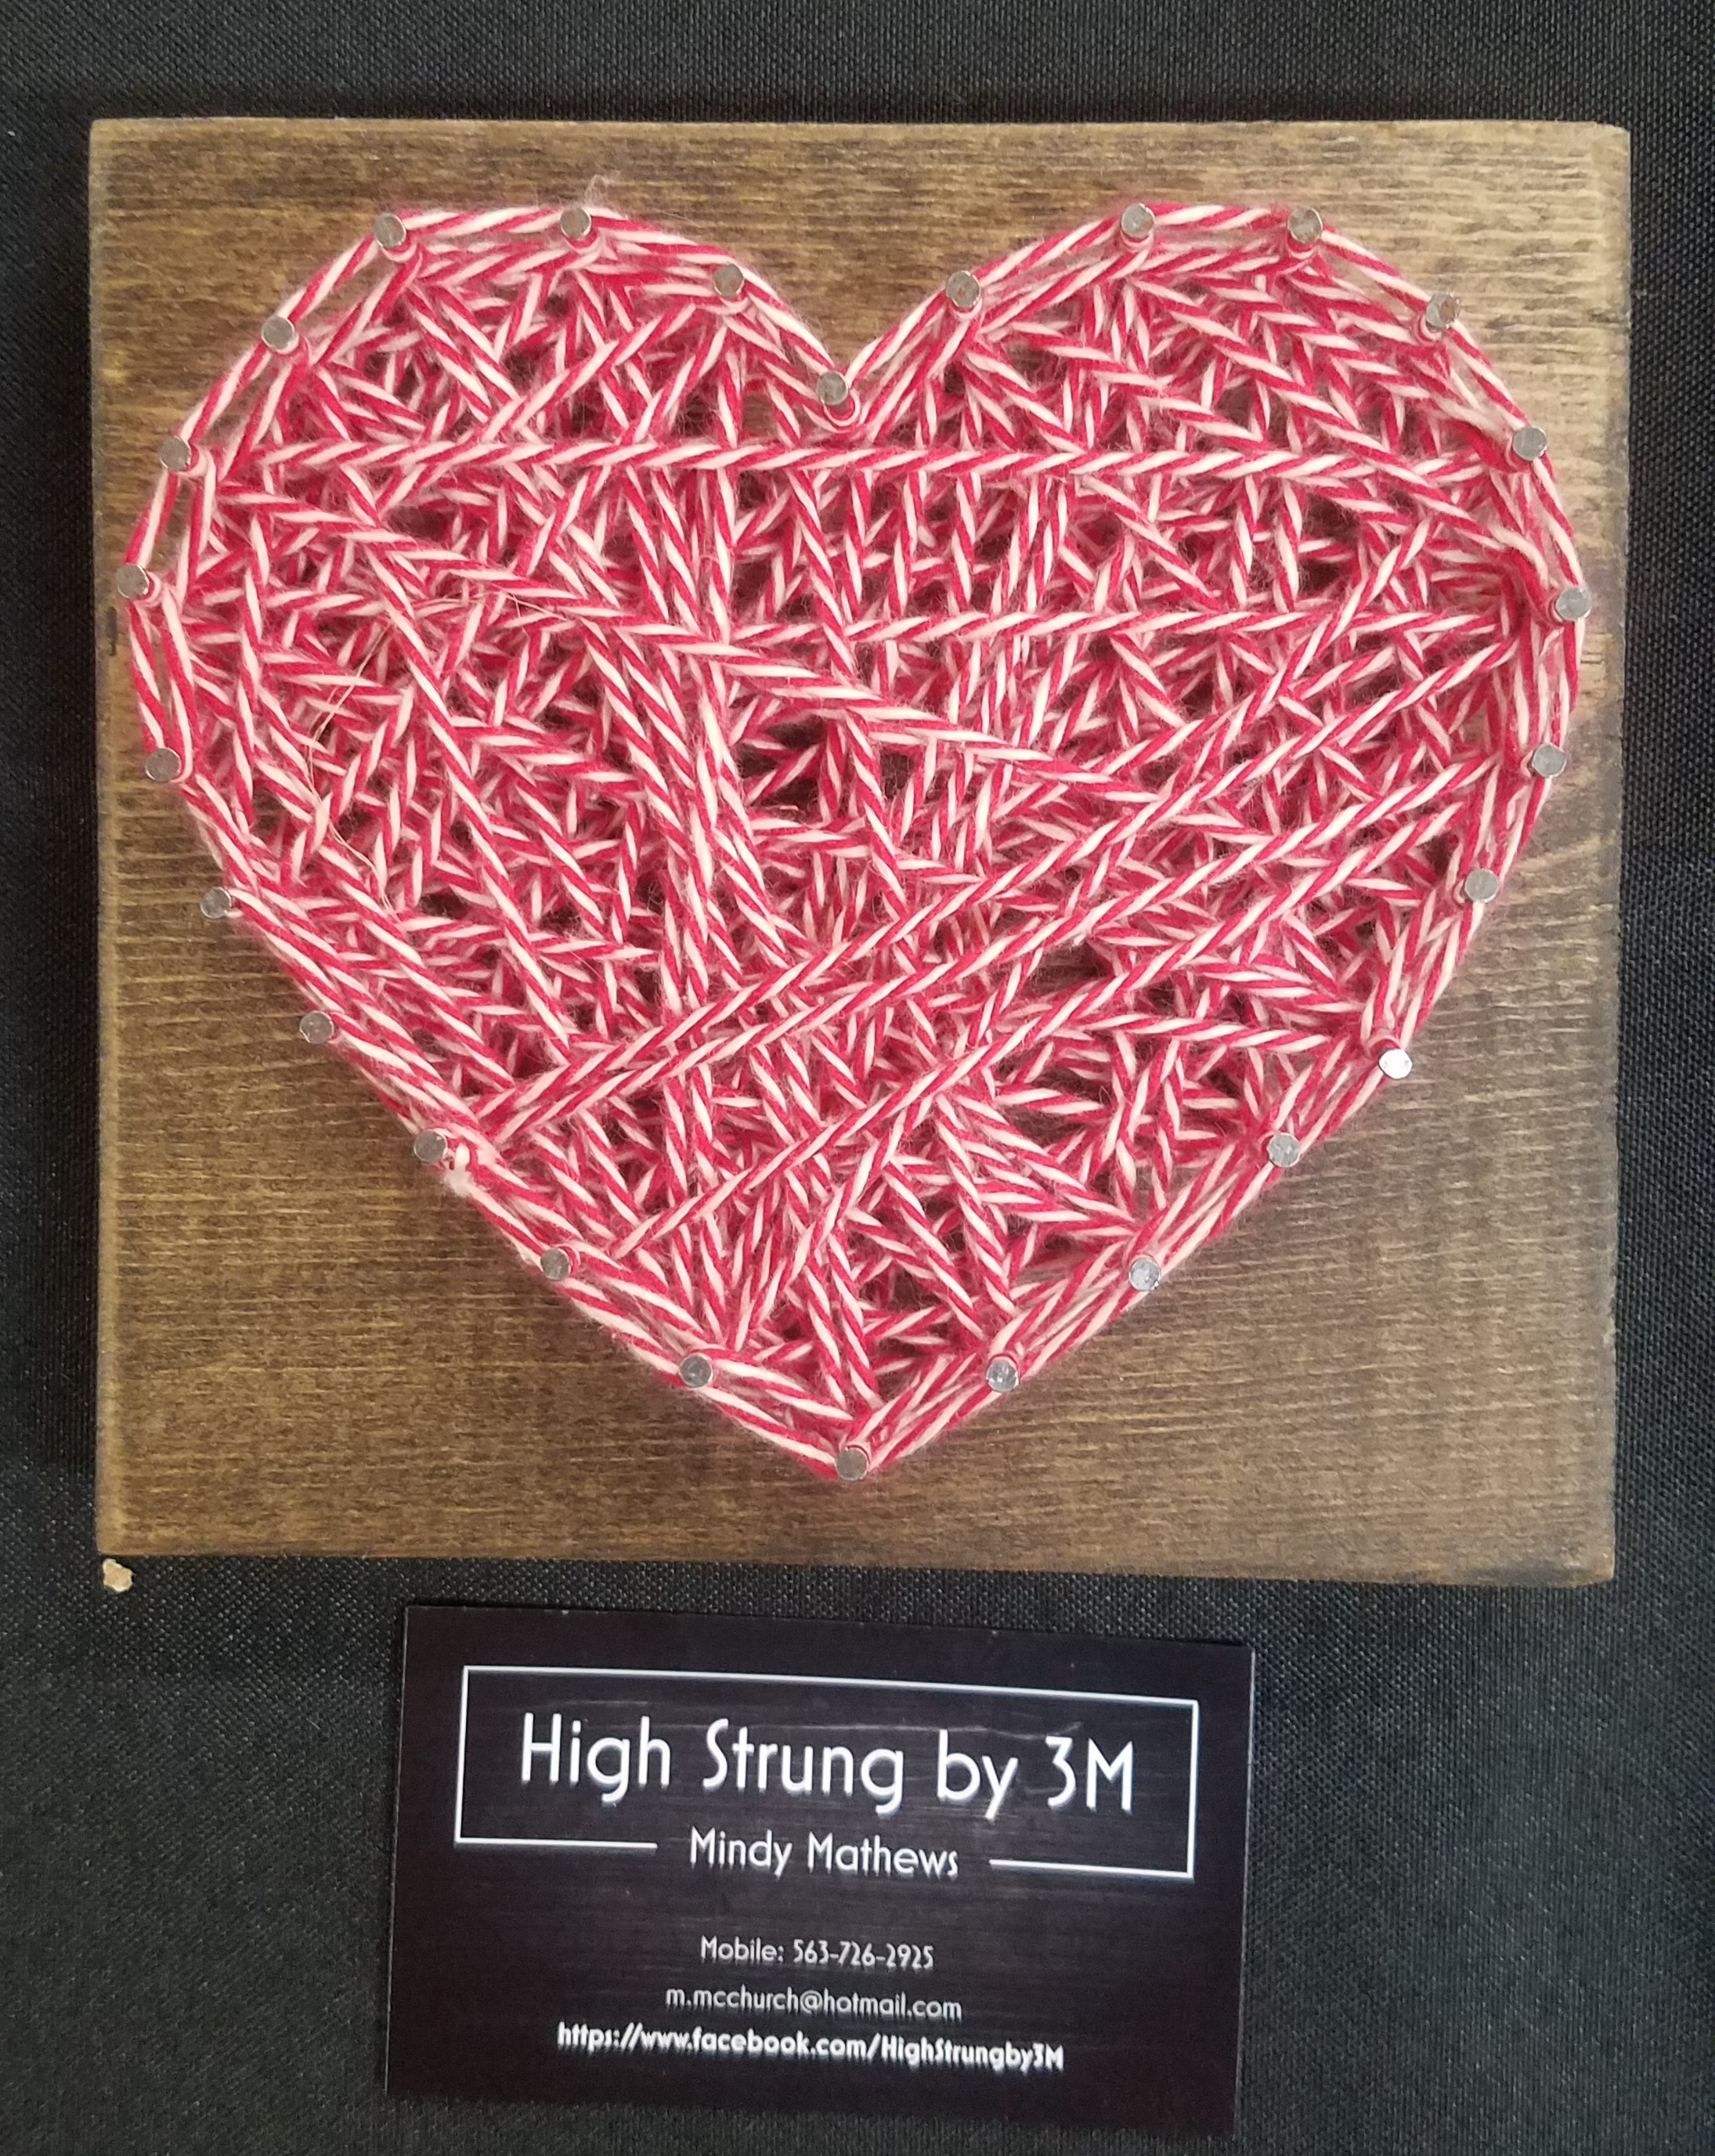 Heart formed of pink string wrapped around pegs